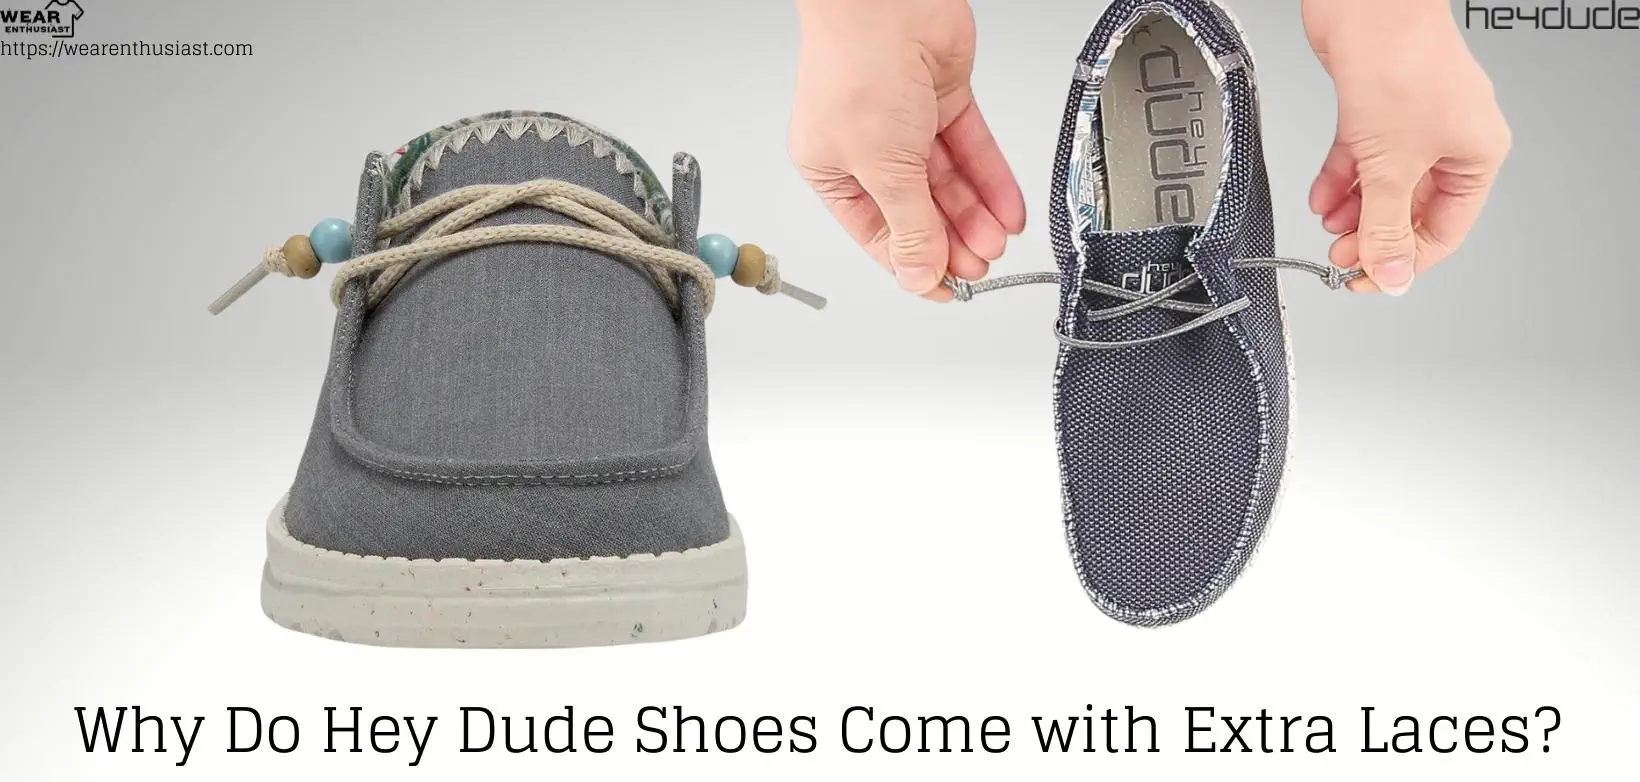 Why Do Hey Dude Shoes Come with Extra Laces?